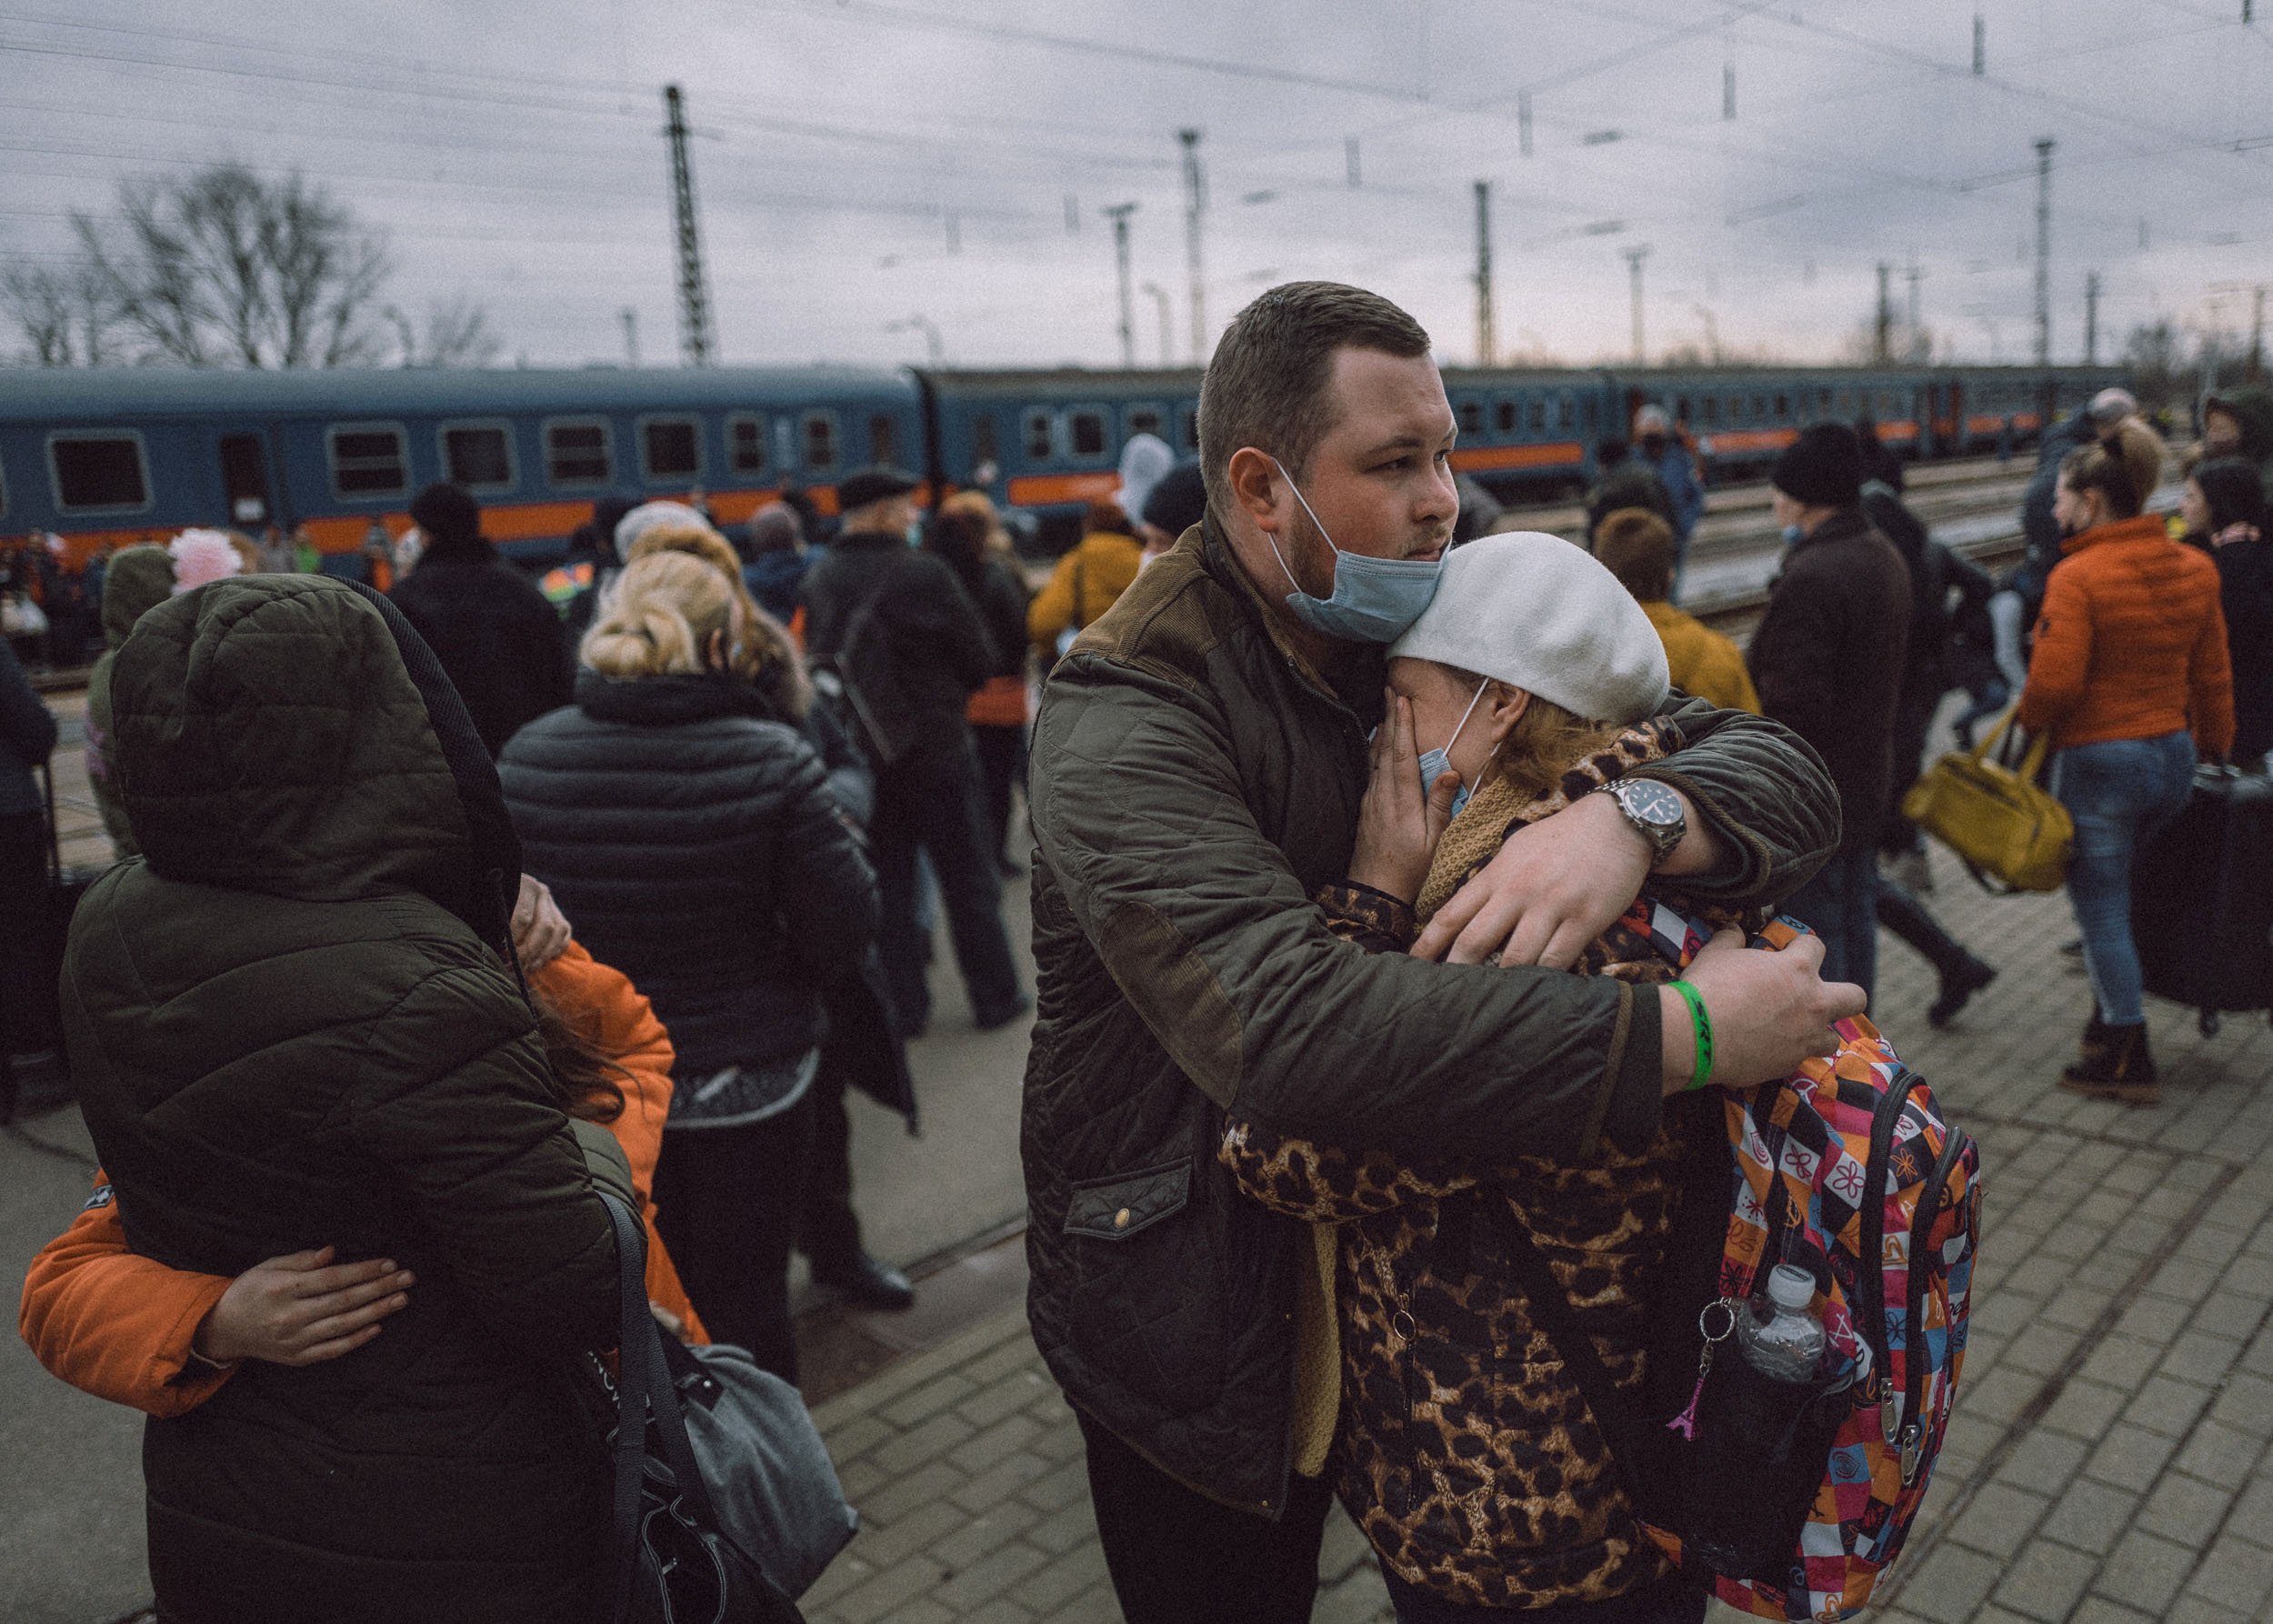  Family re-unite at the train station after crossing the border at Zahony-Csap as they flee Ukraine on February 26, 2022 in Zahony, Hungary 